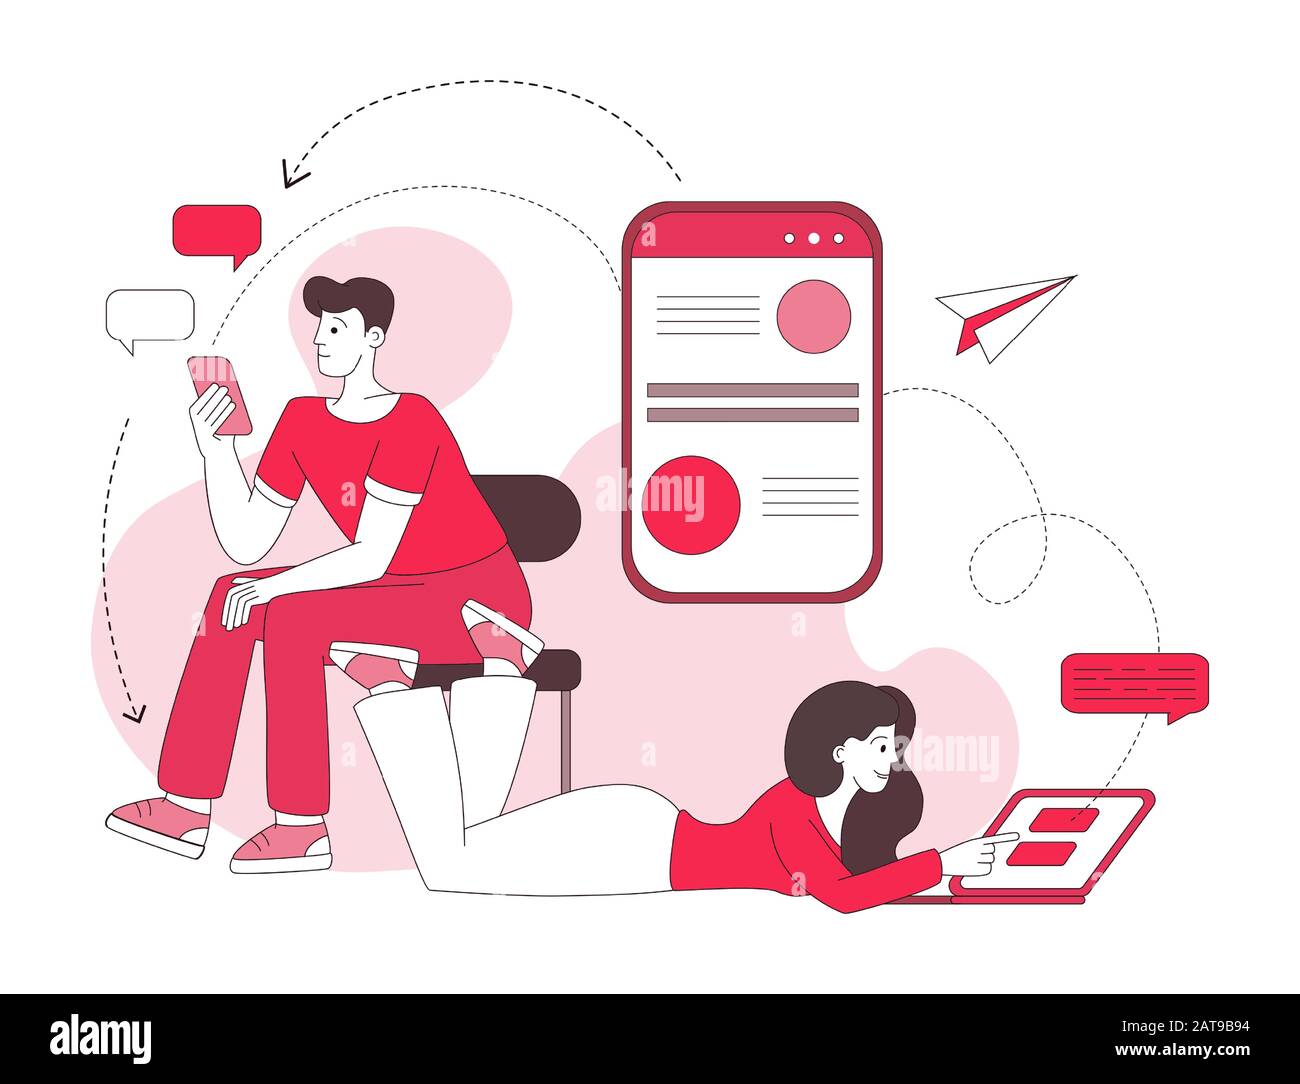 Couple chatting linear vector illustration. Social media messaging, internet forum, online communication red lineart concept. Woman and man using laptop, smartphone, typing messages characters Stock Vector